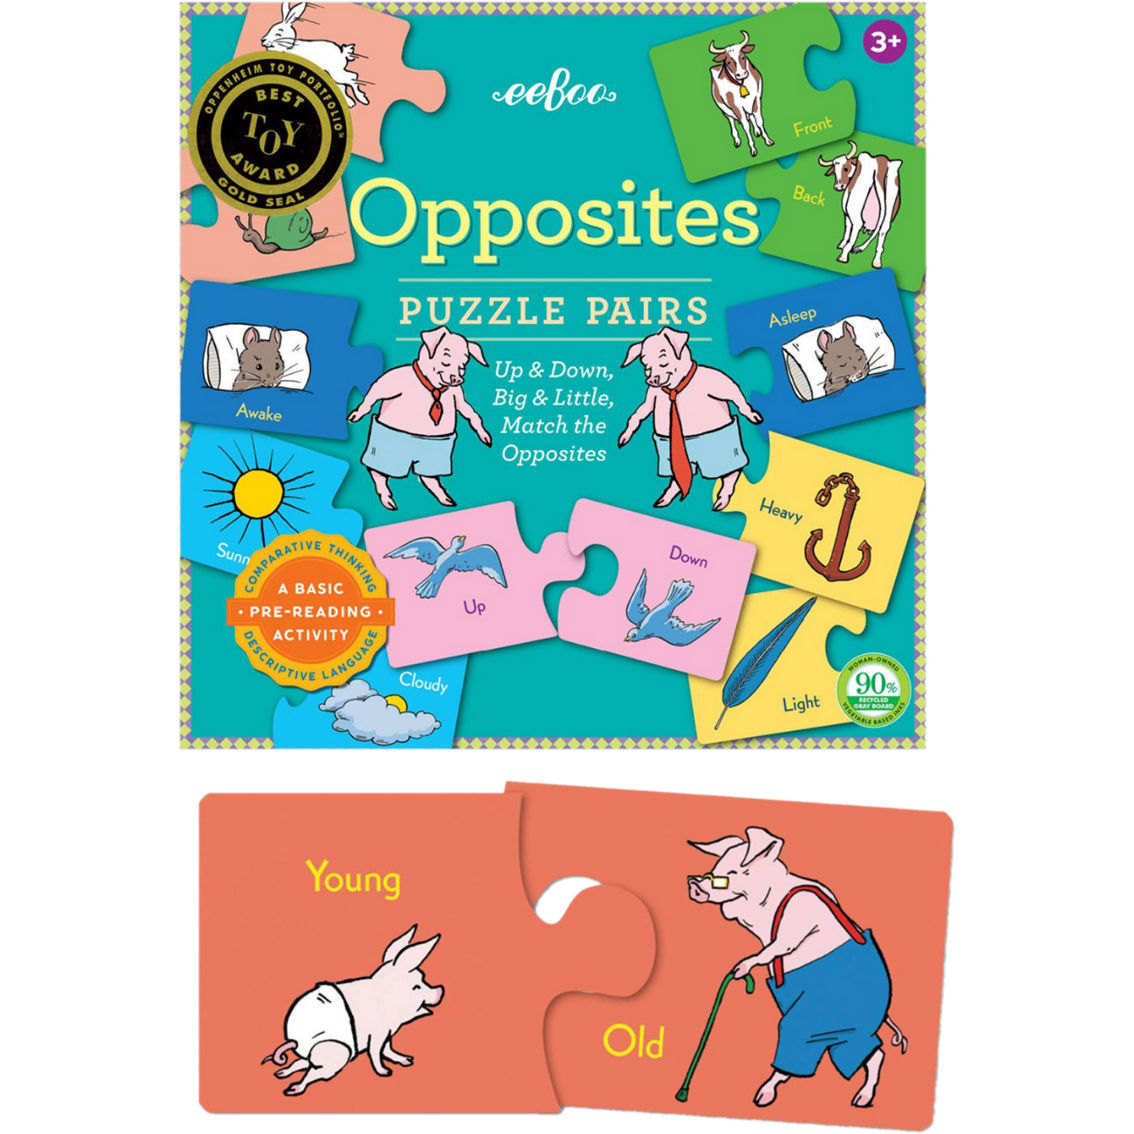 eeBoo Opposites Puzzle Pairs - Image 4 of 4